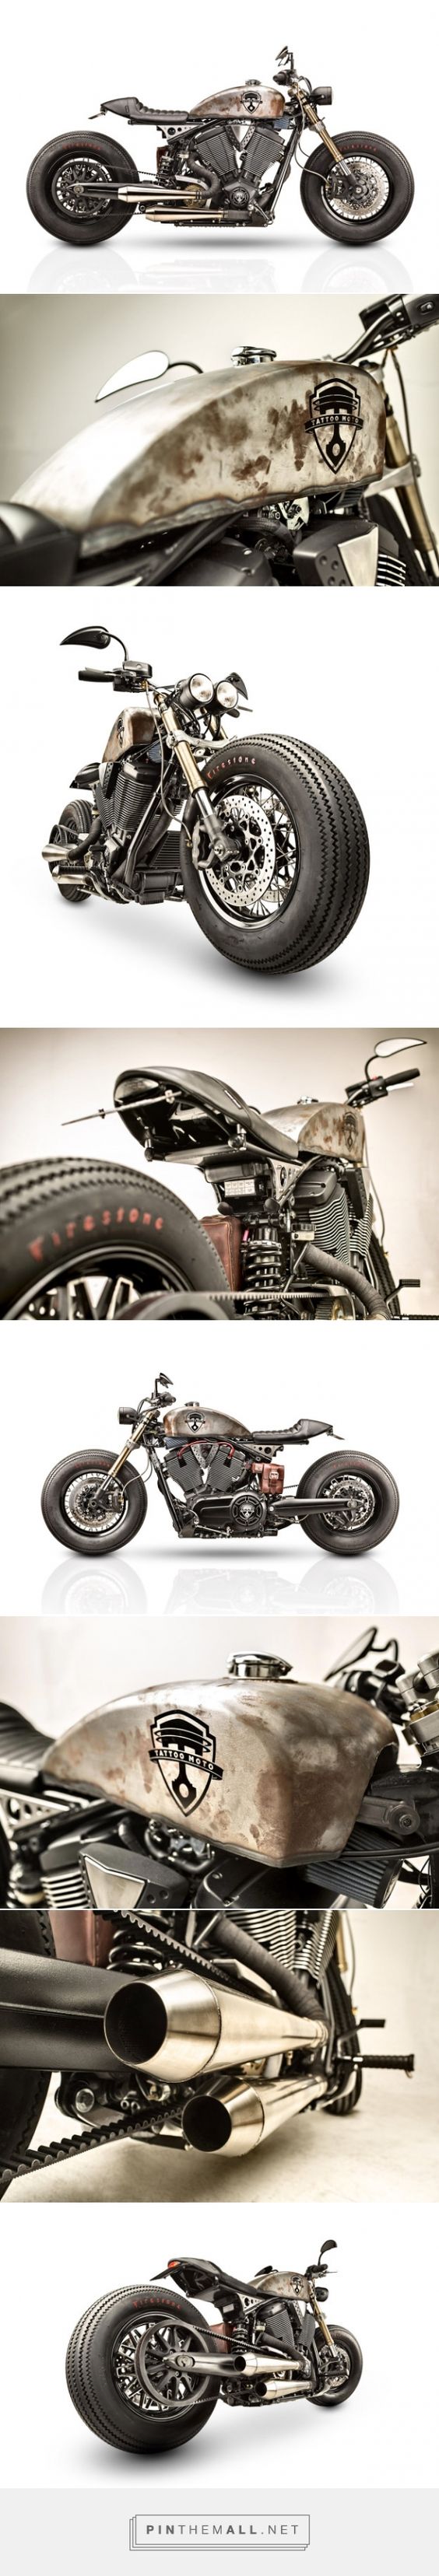 For Motorcycle fans: Modern Muscle: Victory Gunner by Tattoo Projects - click to read more about